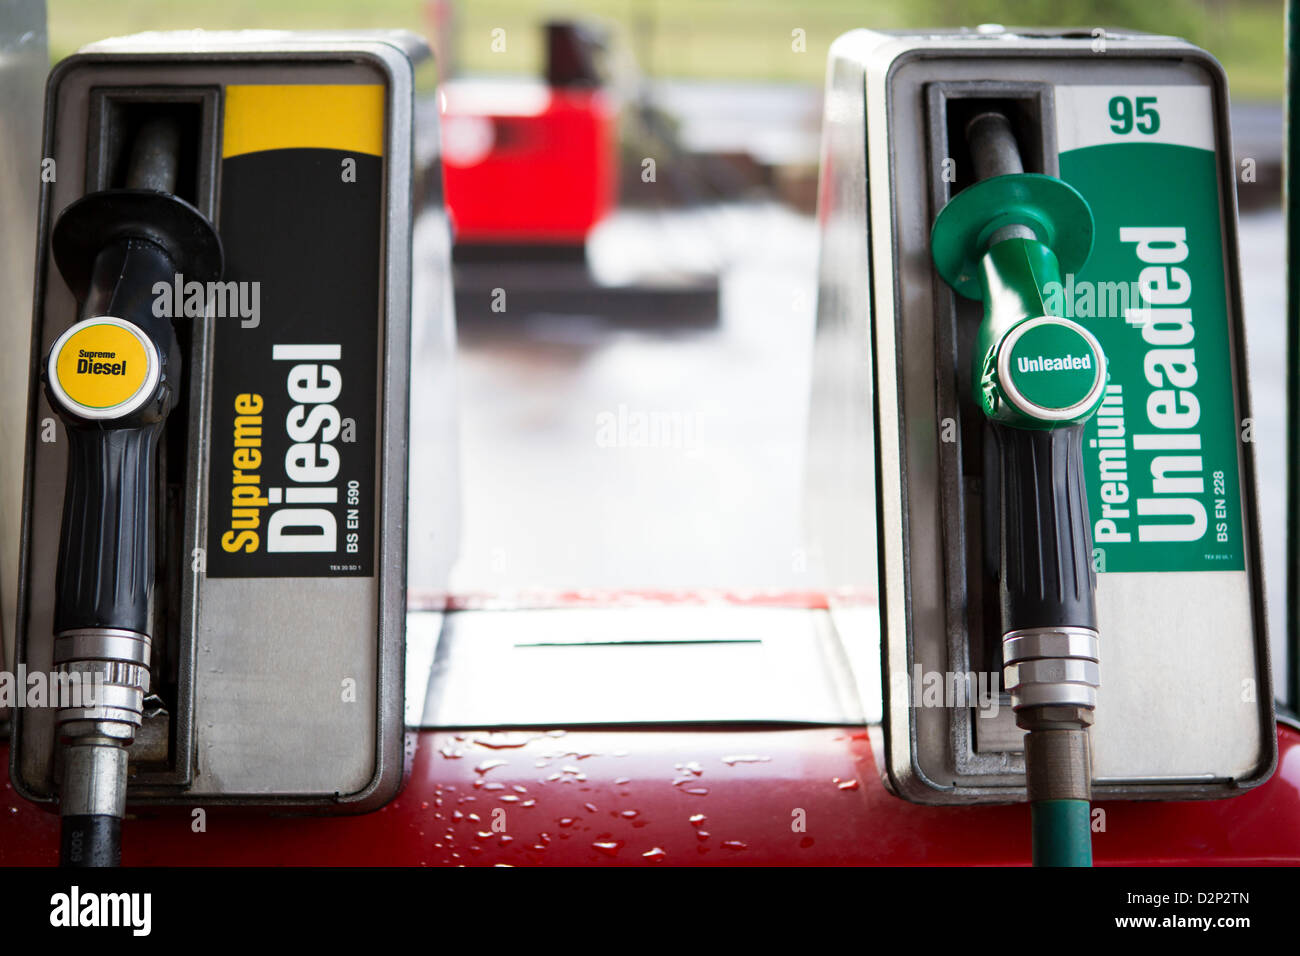 A close up view of a unleaded petrol pump. Stock Photo